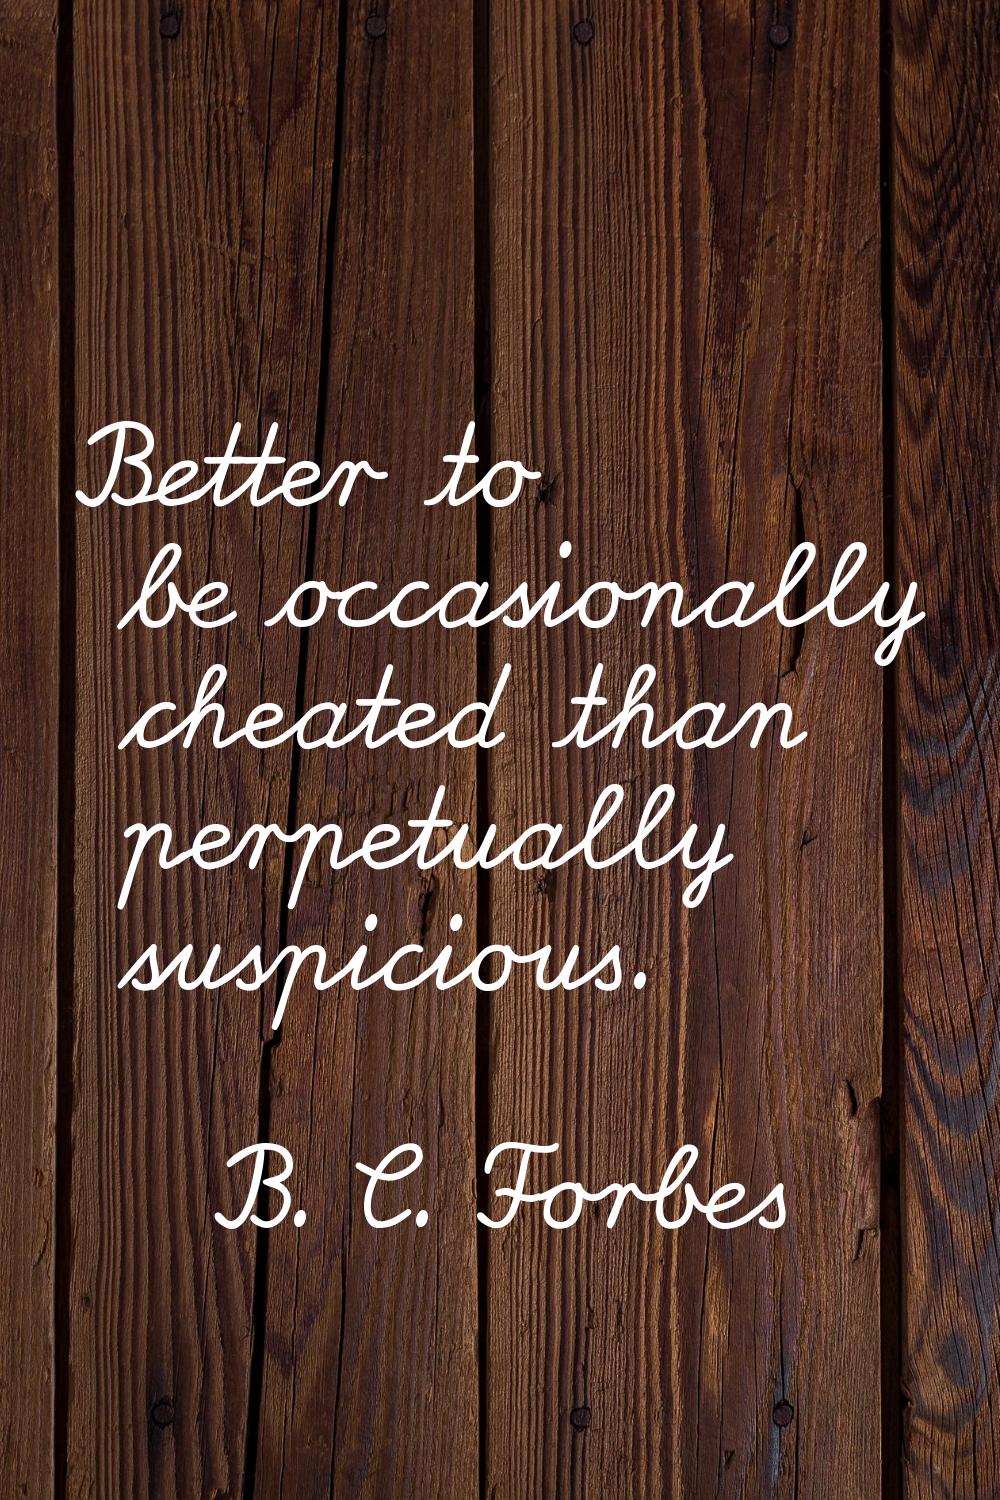 Better to be occasionally cheated than perpetually suspicious.